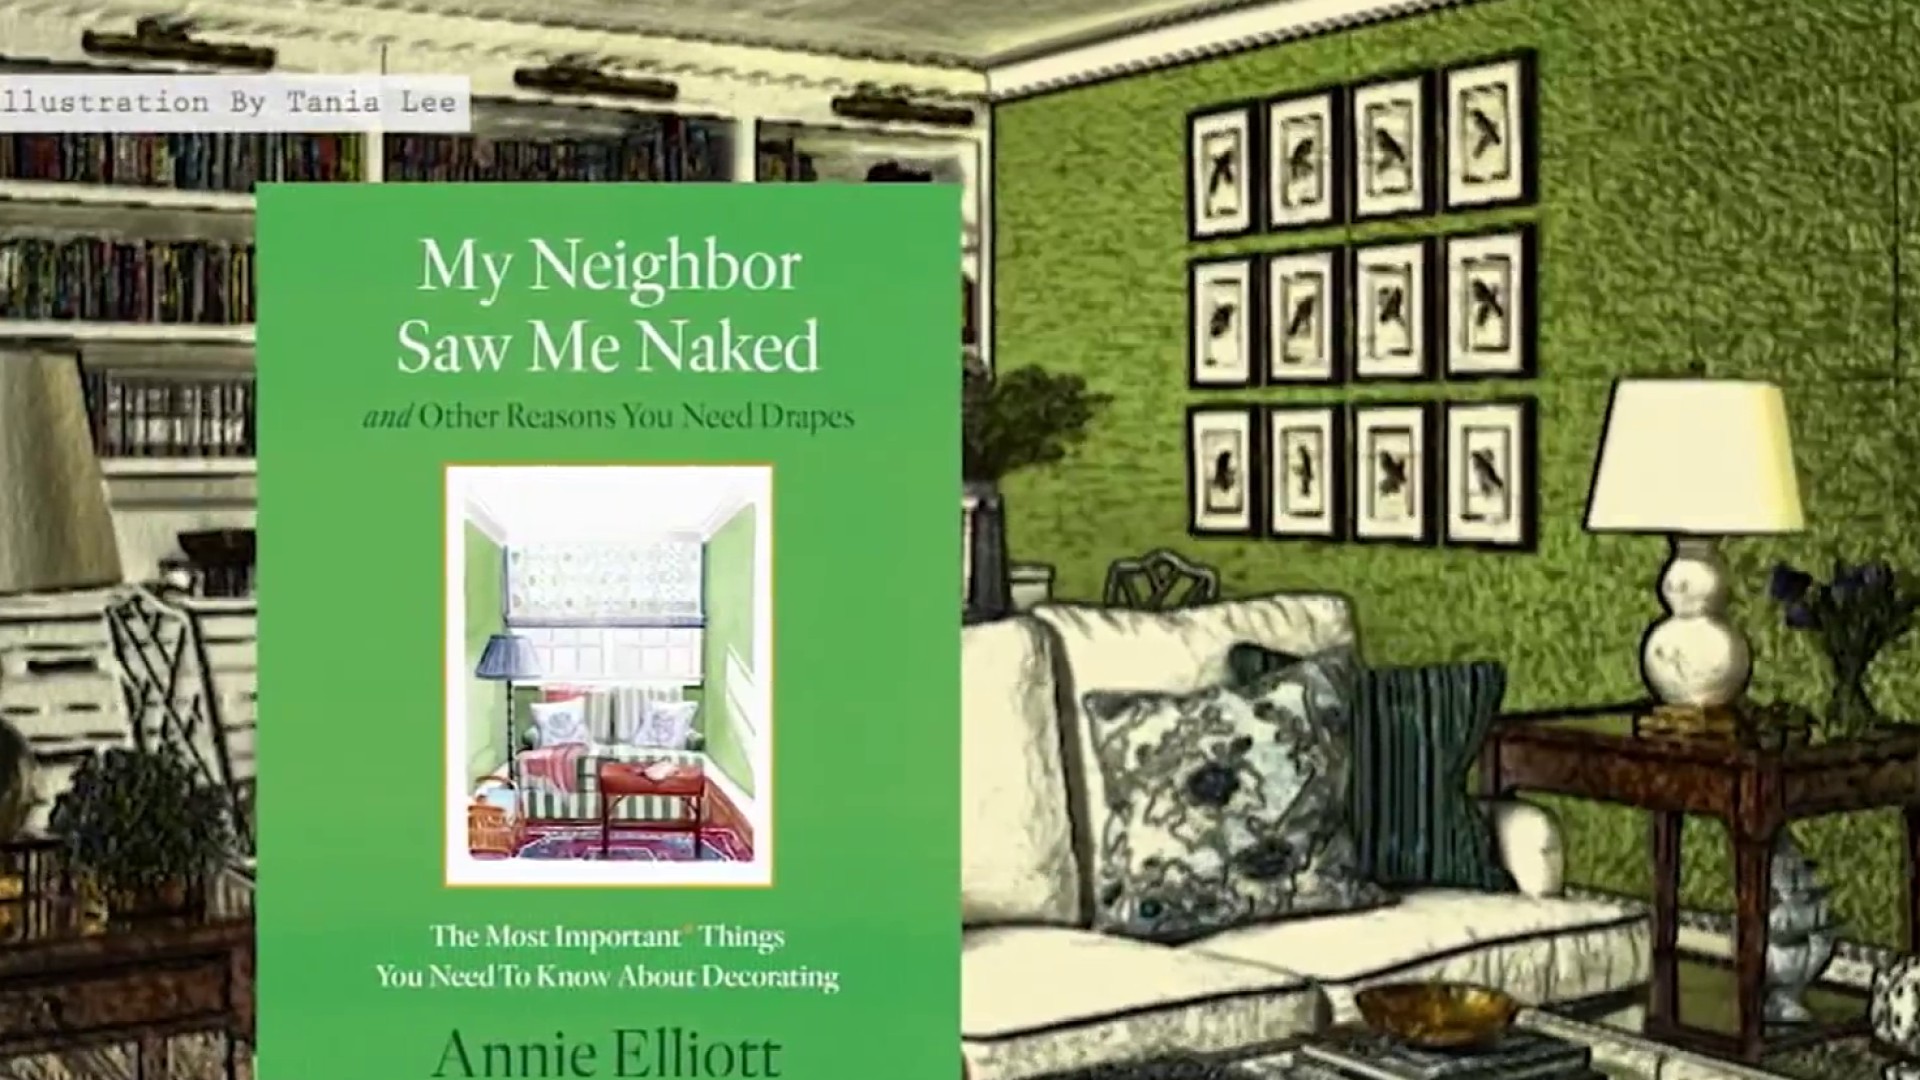 My Neighbor Saw Me Naked Book highlights the importance of drapes picture